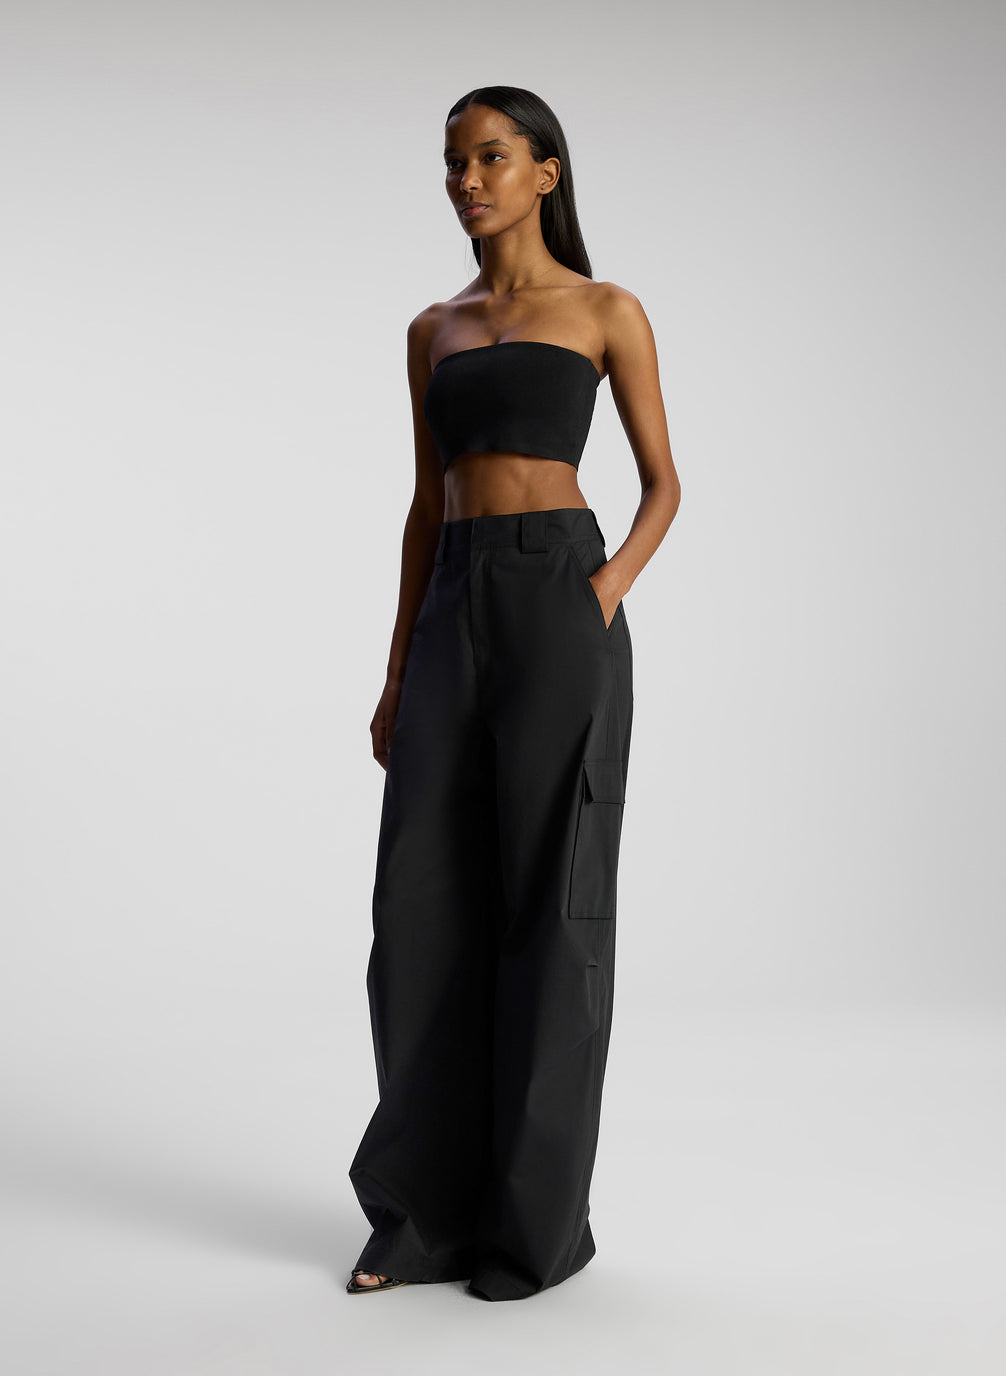 view of woman wearing black strapless crop top and black pants